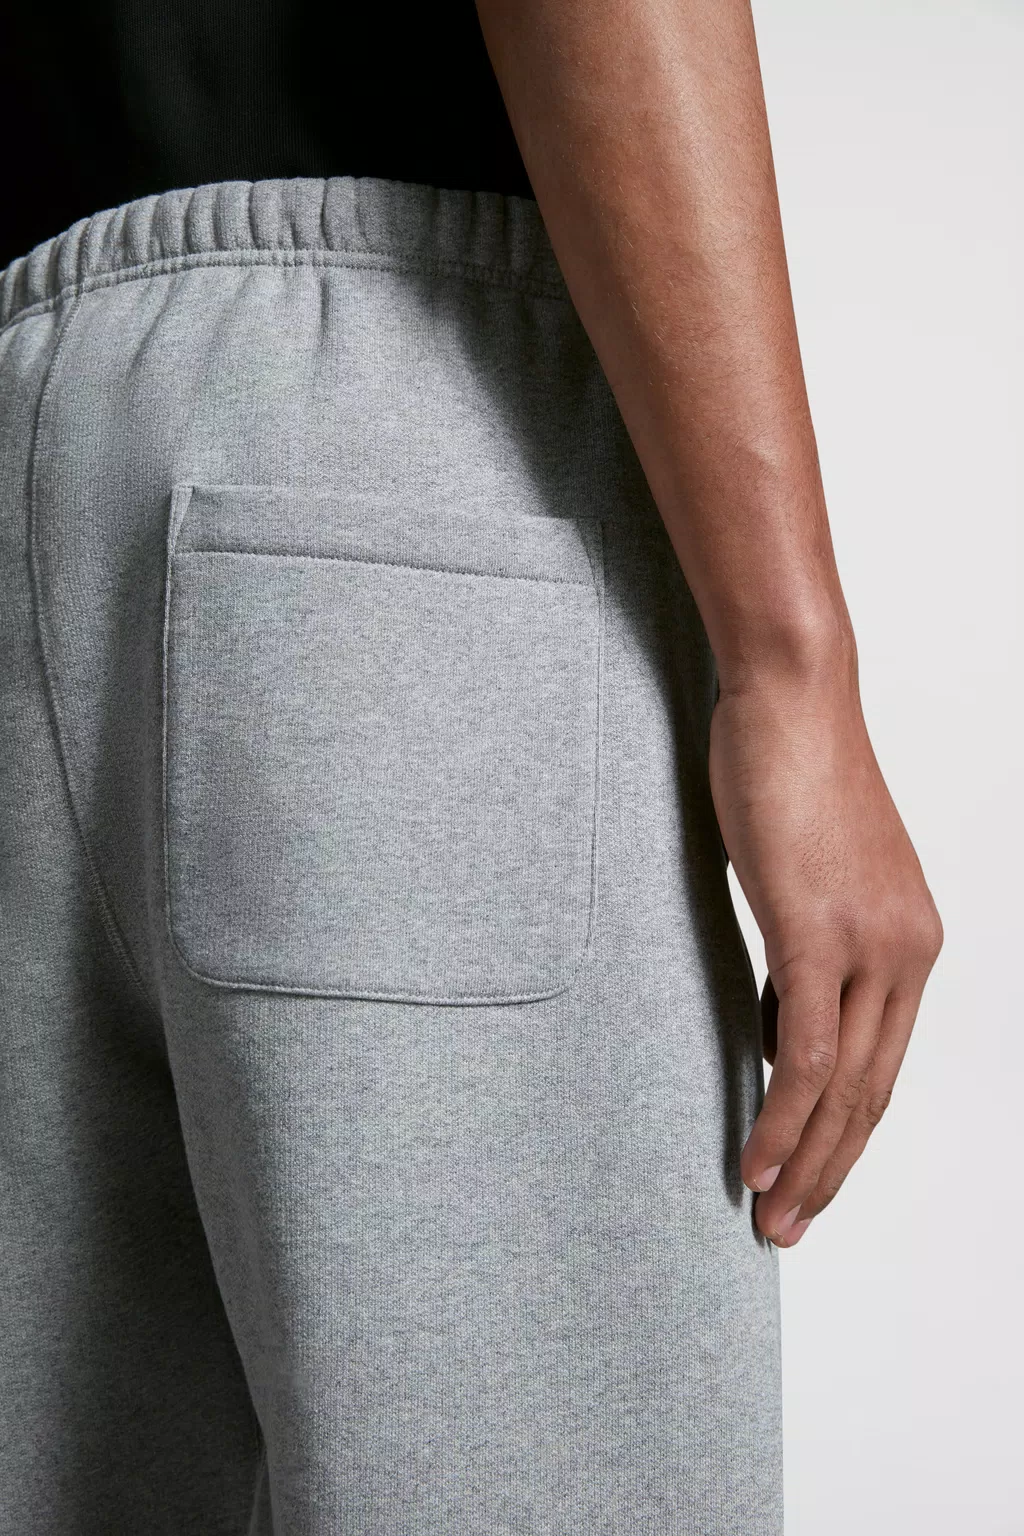 Grey Logo Sweatpants - Moncler x Roc Nation designed by Jay-Z for ...